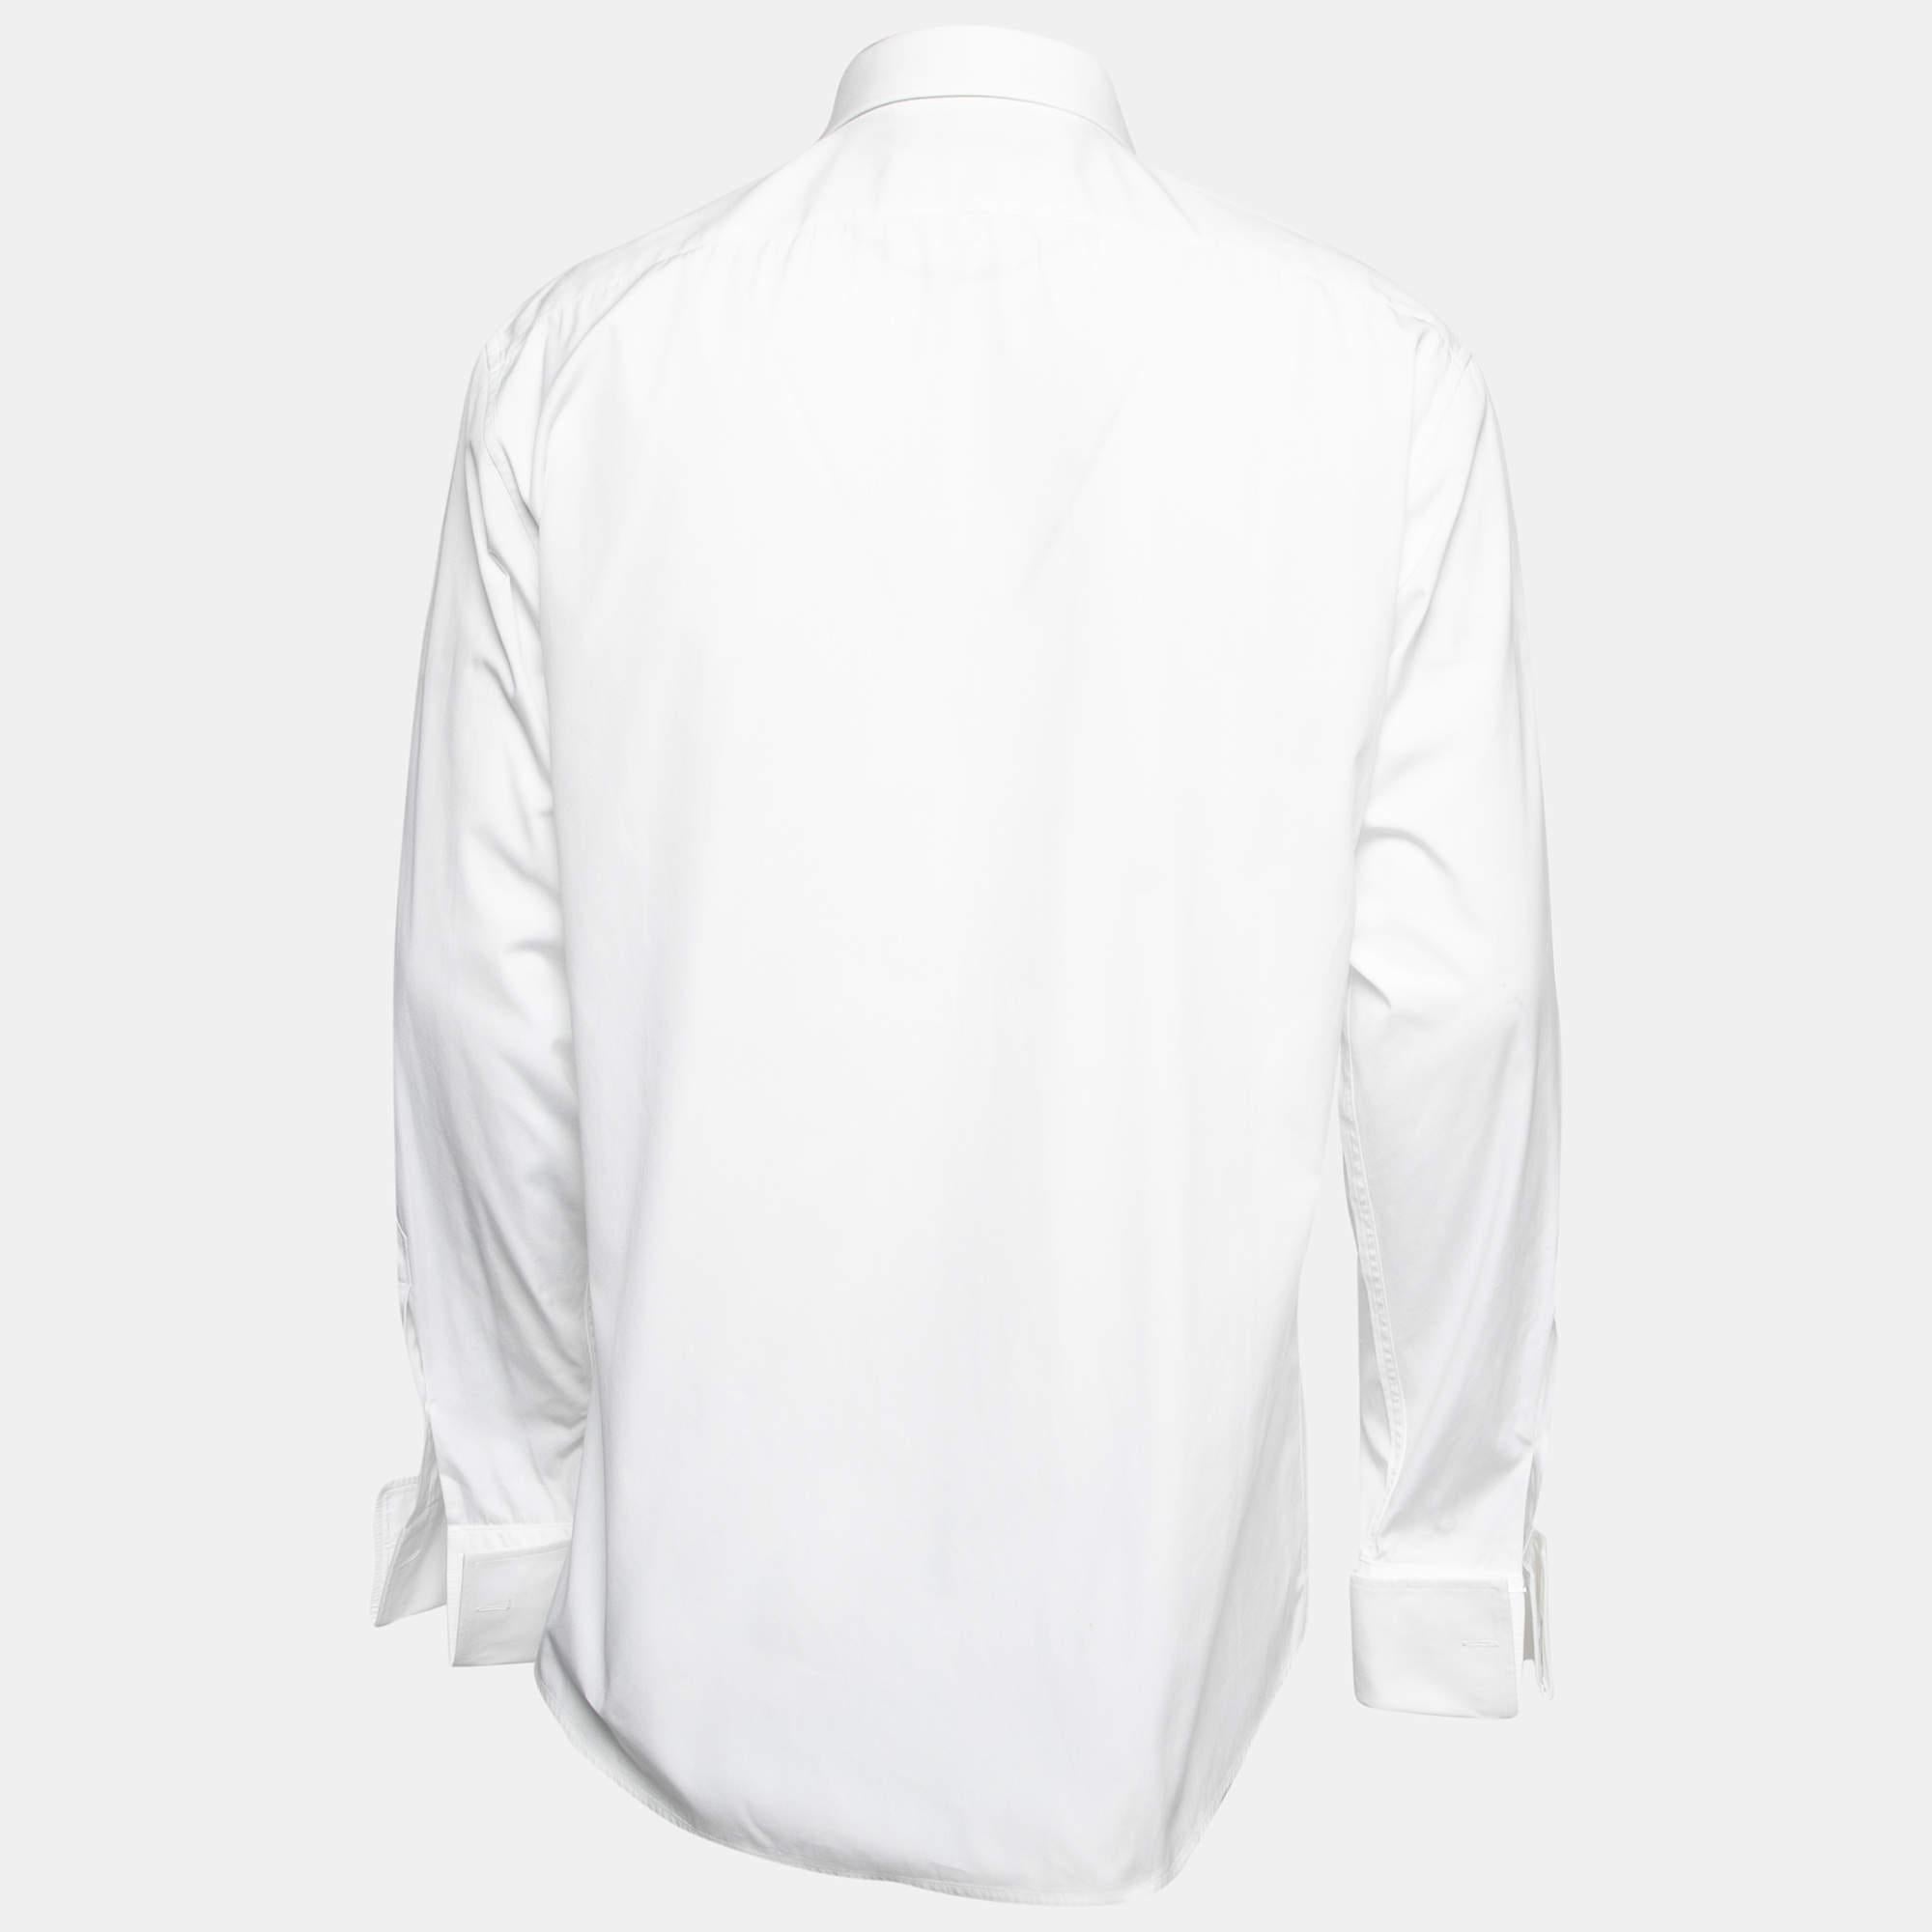 Made from high-quality cotton, it features a classic button-front design that exudes elegance and versatility, making it perfect for both formal occasions and smart-casual ensembles.

